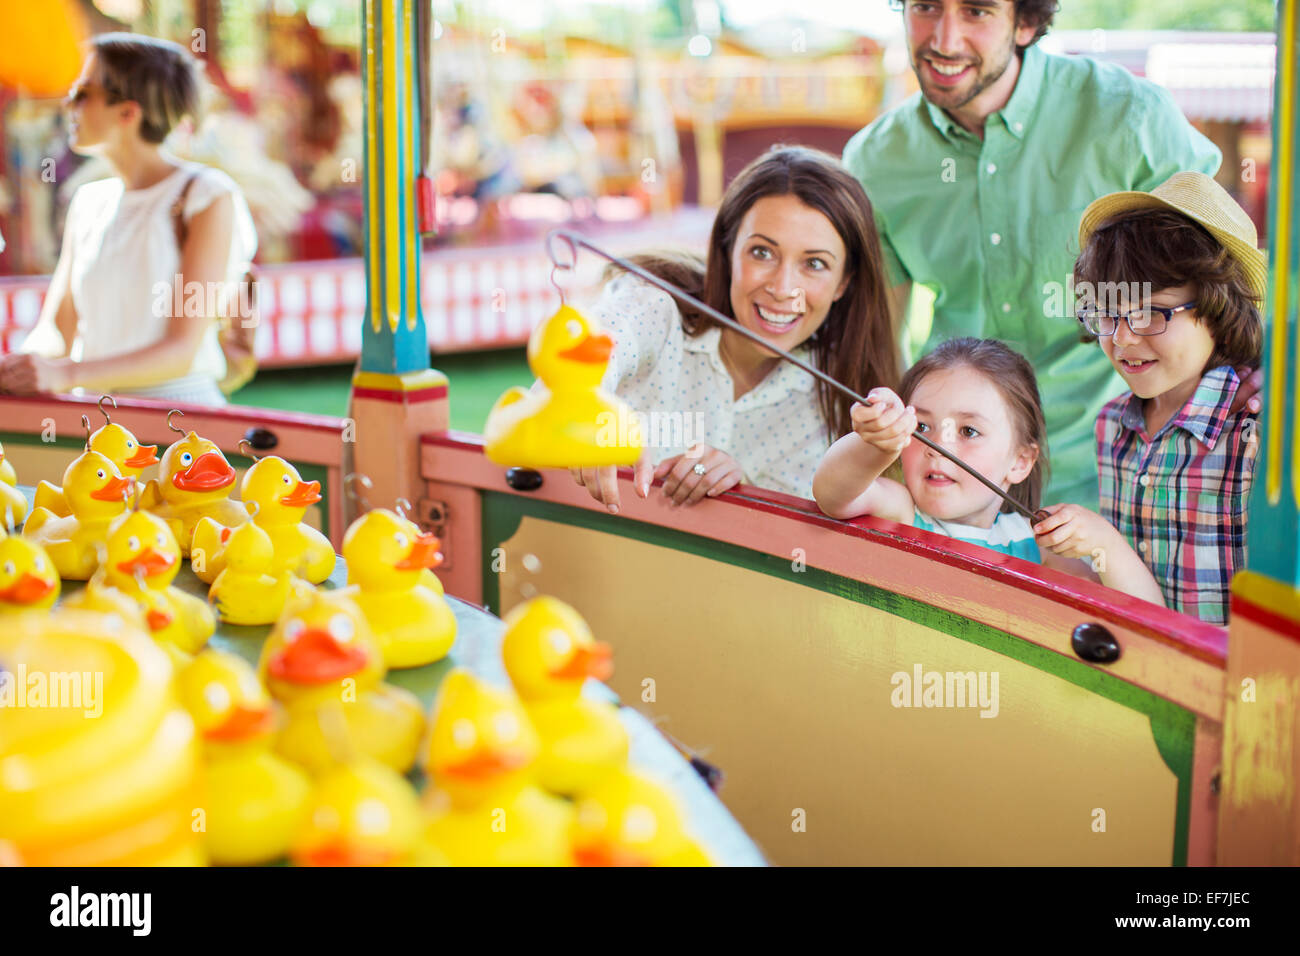 Parents with two children having fun with fishing game in amusement park Stock Photo